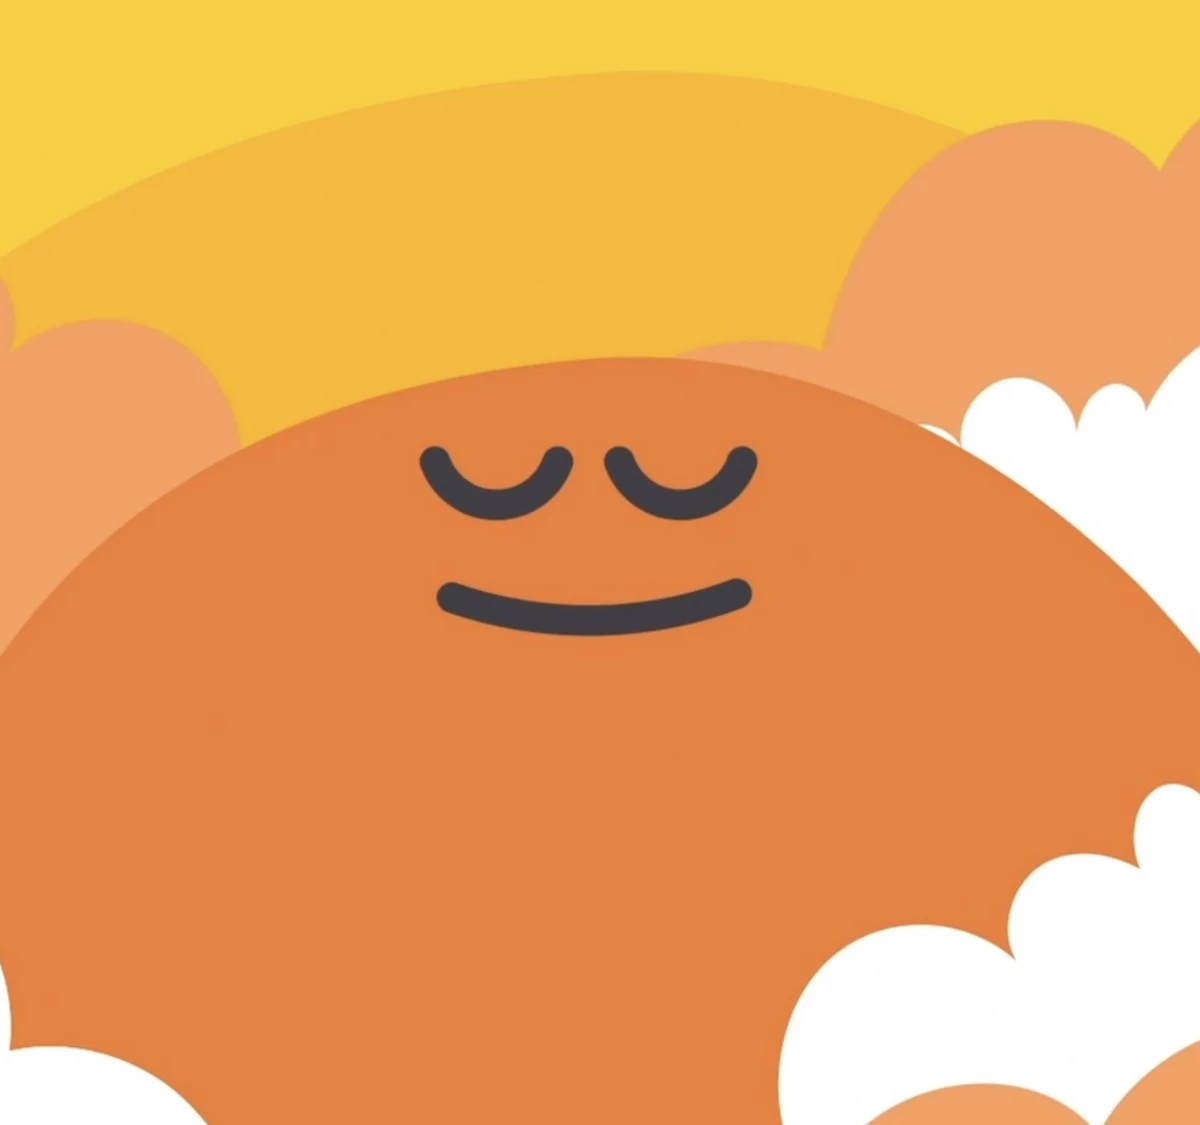 Meditation App Reviews What I Like About Headspace Series